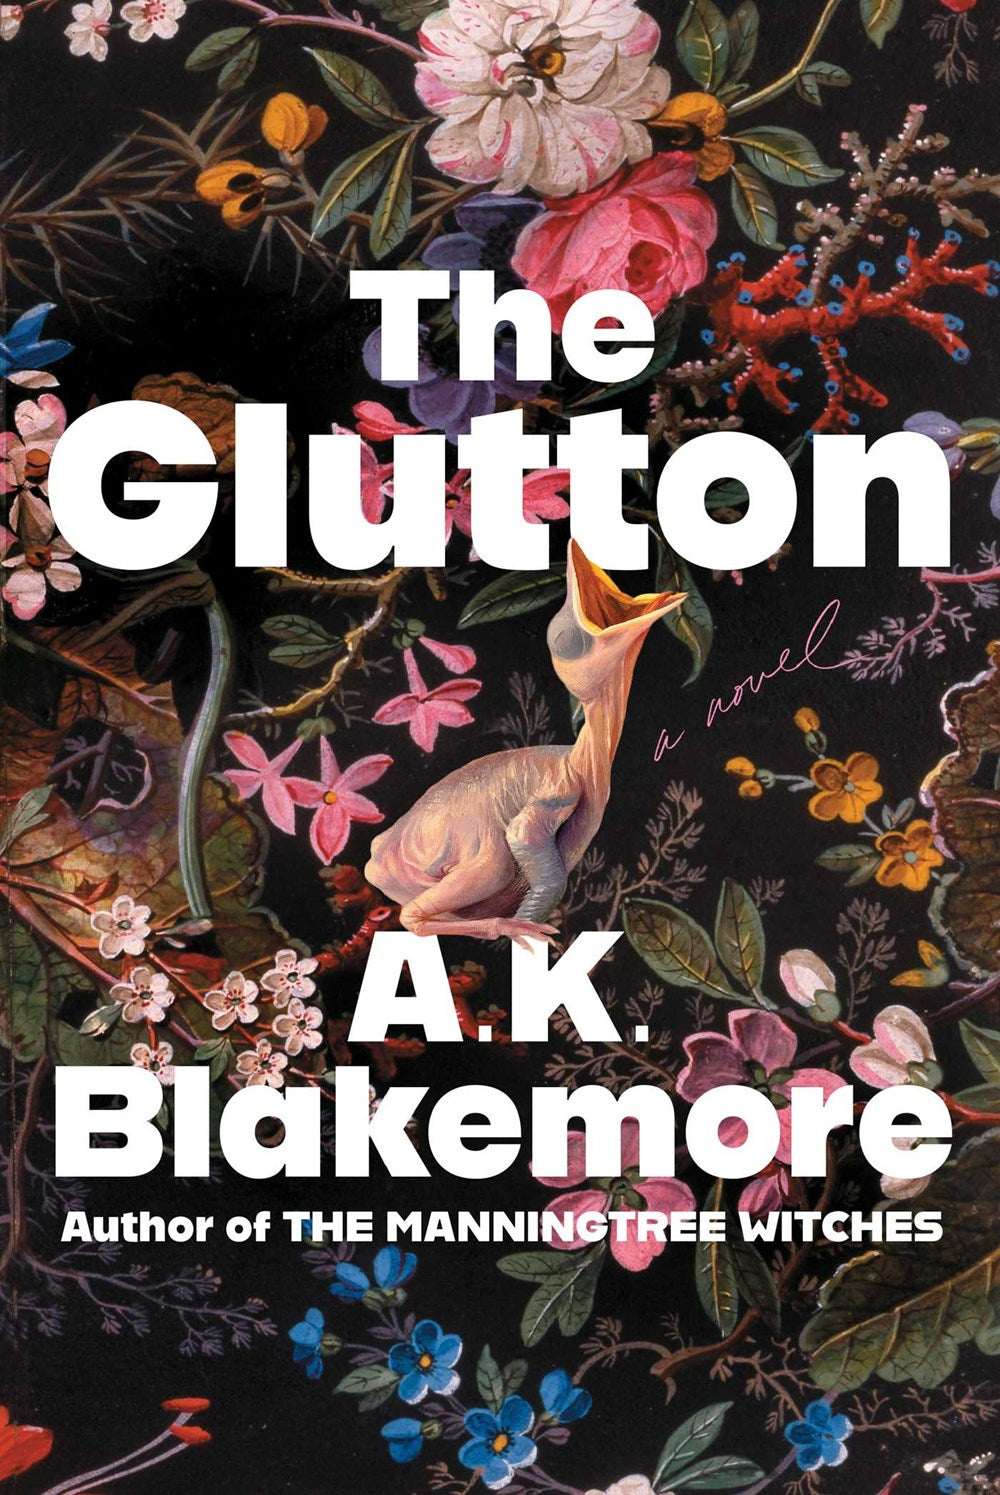 The Glutton: A Novel by A.K. Blakemore (10/31/23)